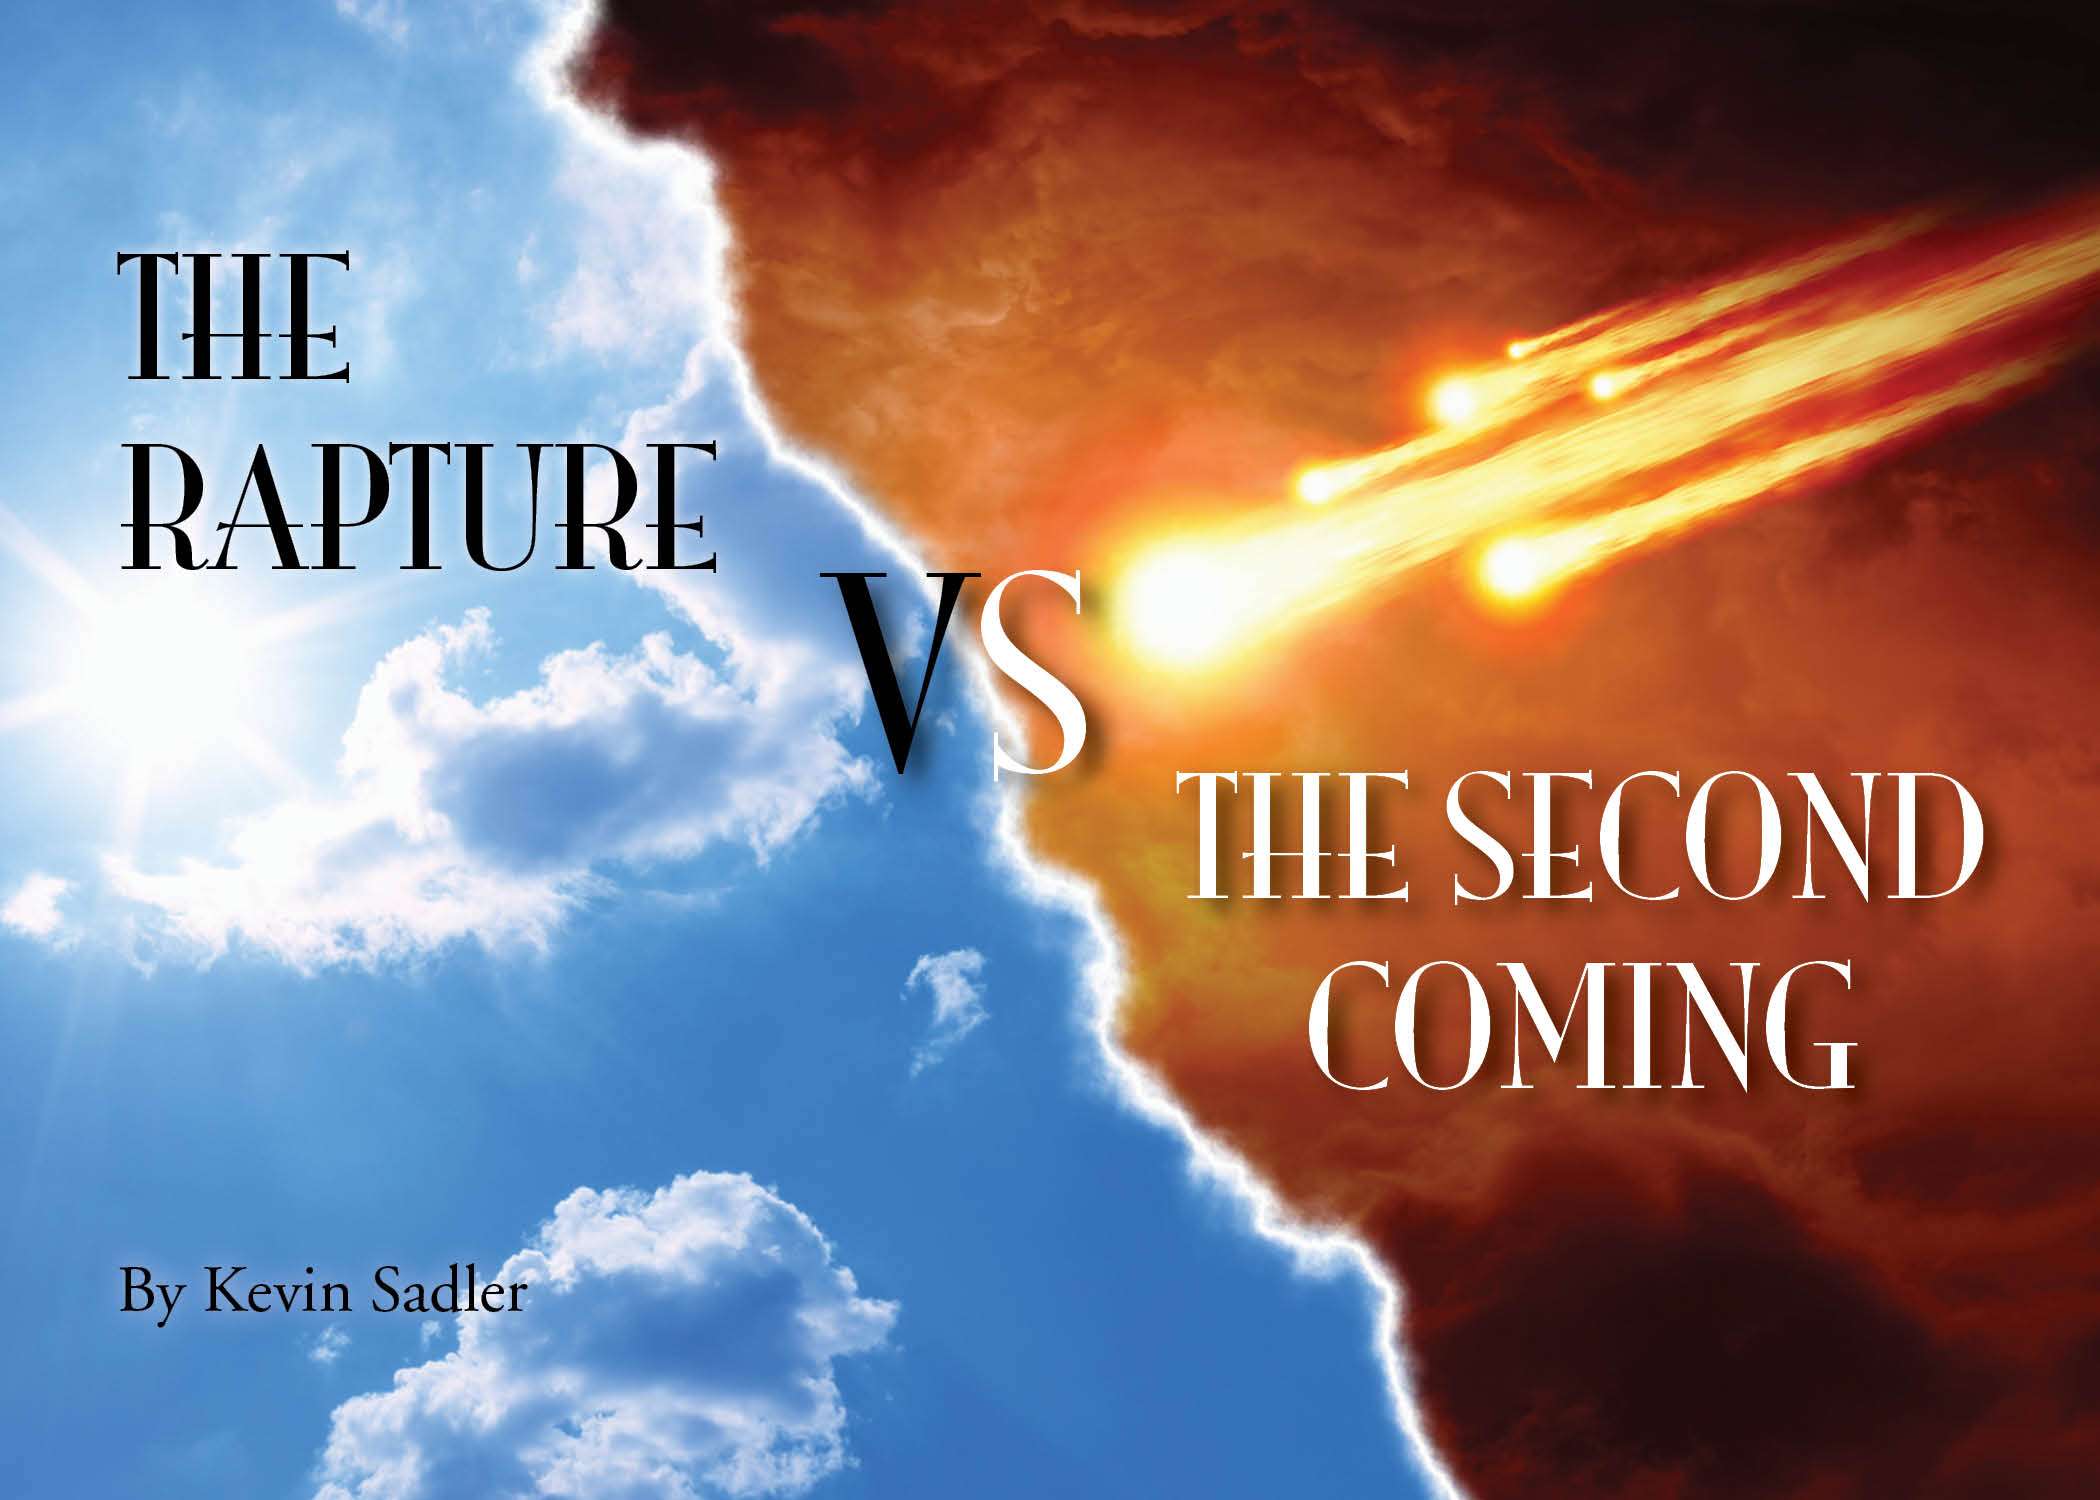 Booklet: The Rapture vs. The Second Coming